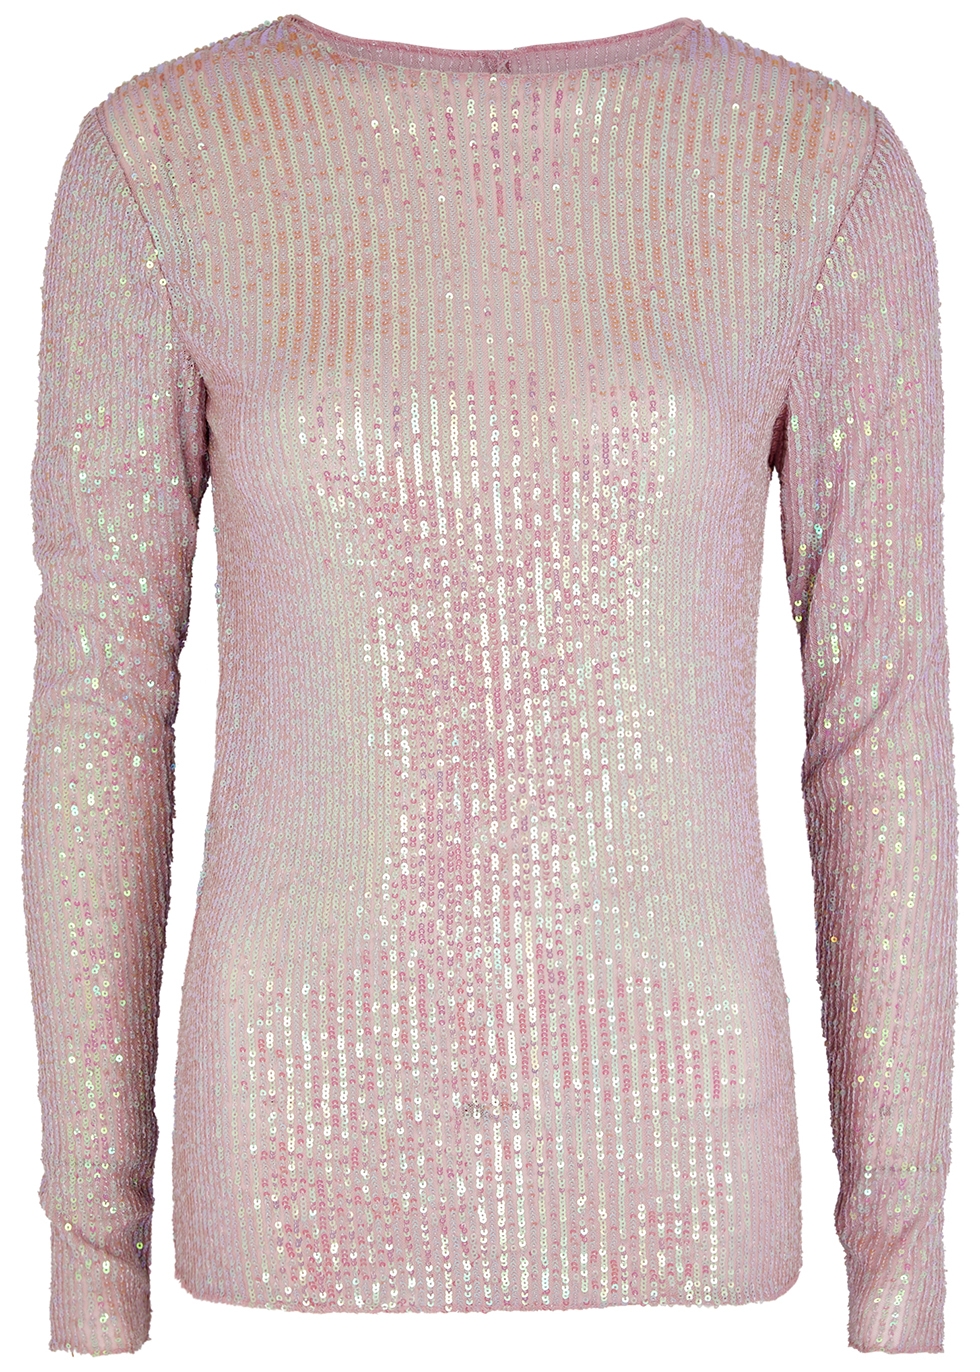 Free People Gold Rush sequin-embellished top - Harvey Nichols